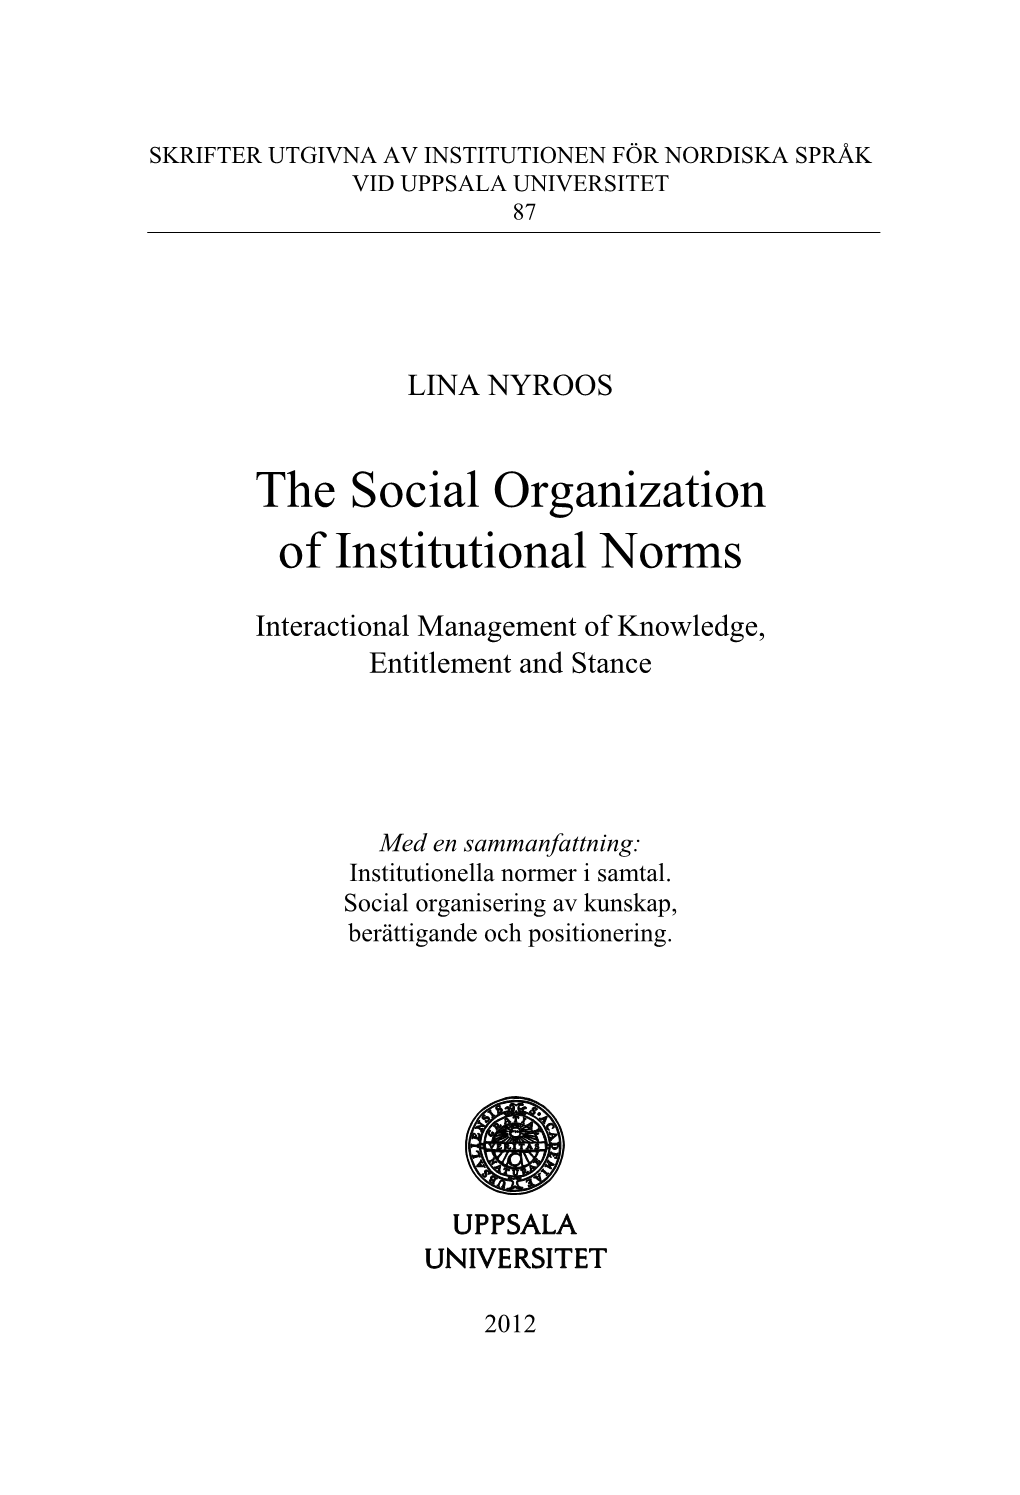 The Social Organization of Institutional Norms